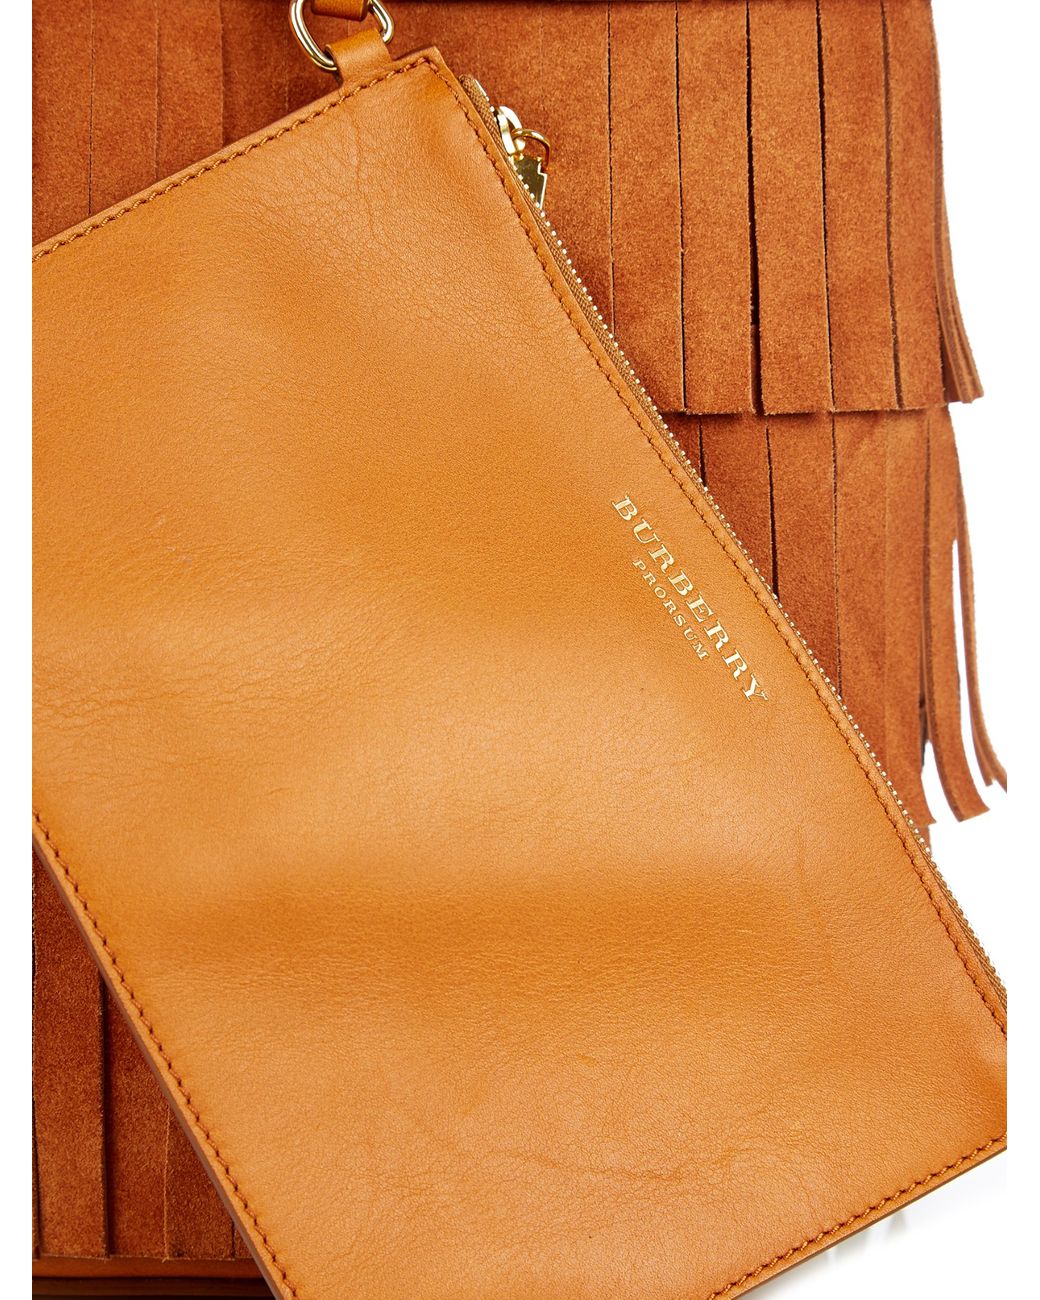 Burberry Prorsum Fringed Suede Bucket Bag in Brown | Lyst